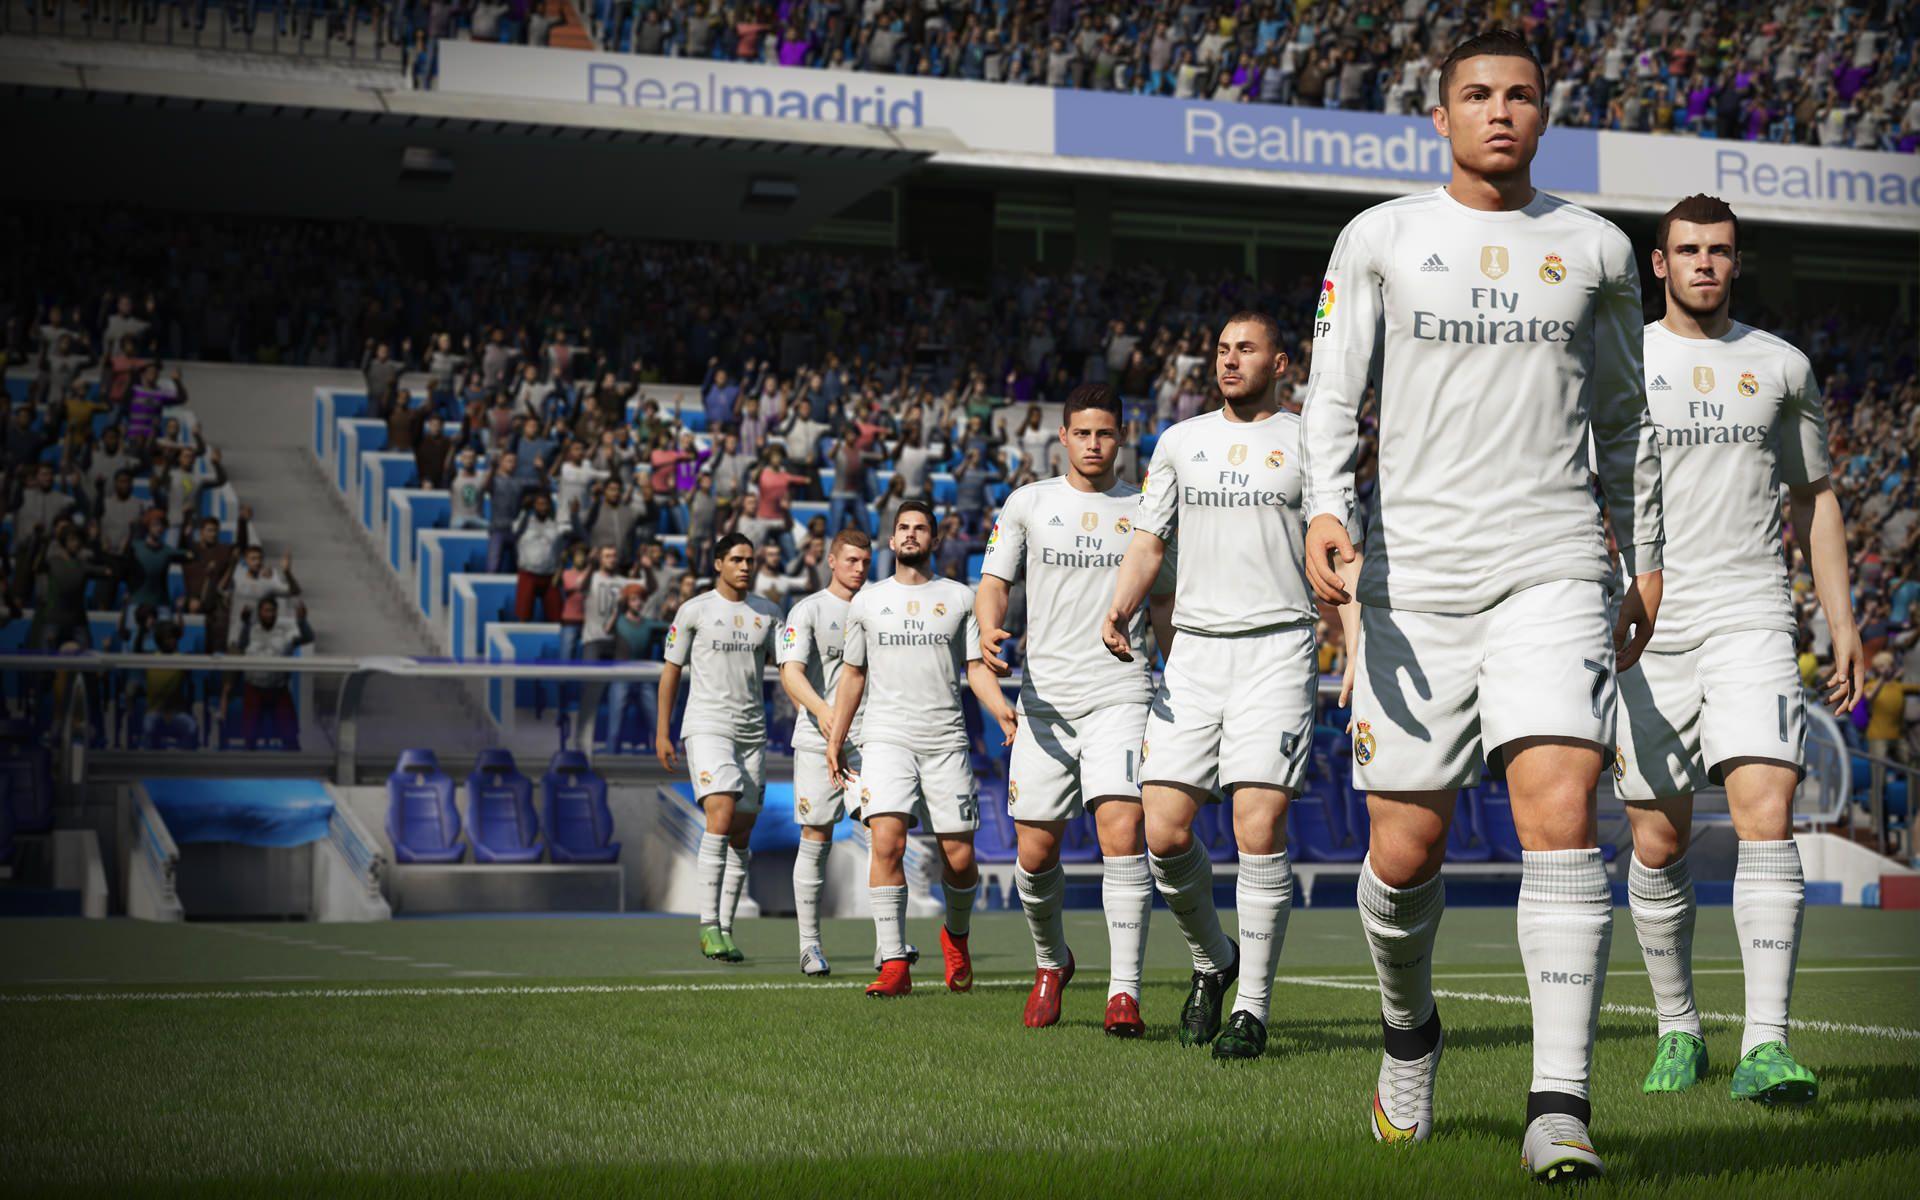 How to Play the UEFA Champions League in FIFA 19 – FIFPlay